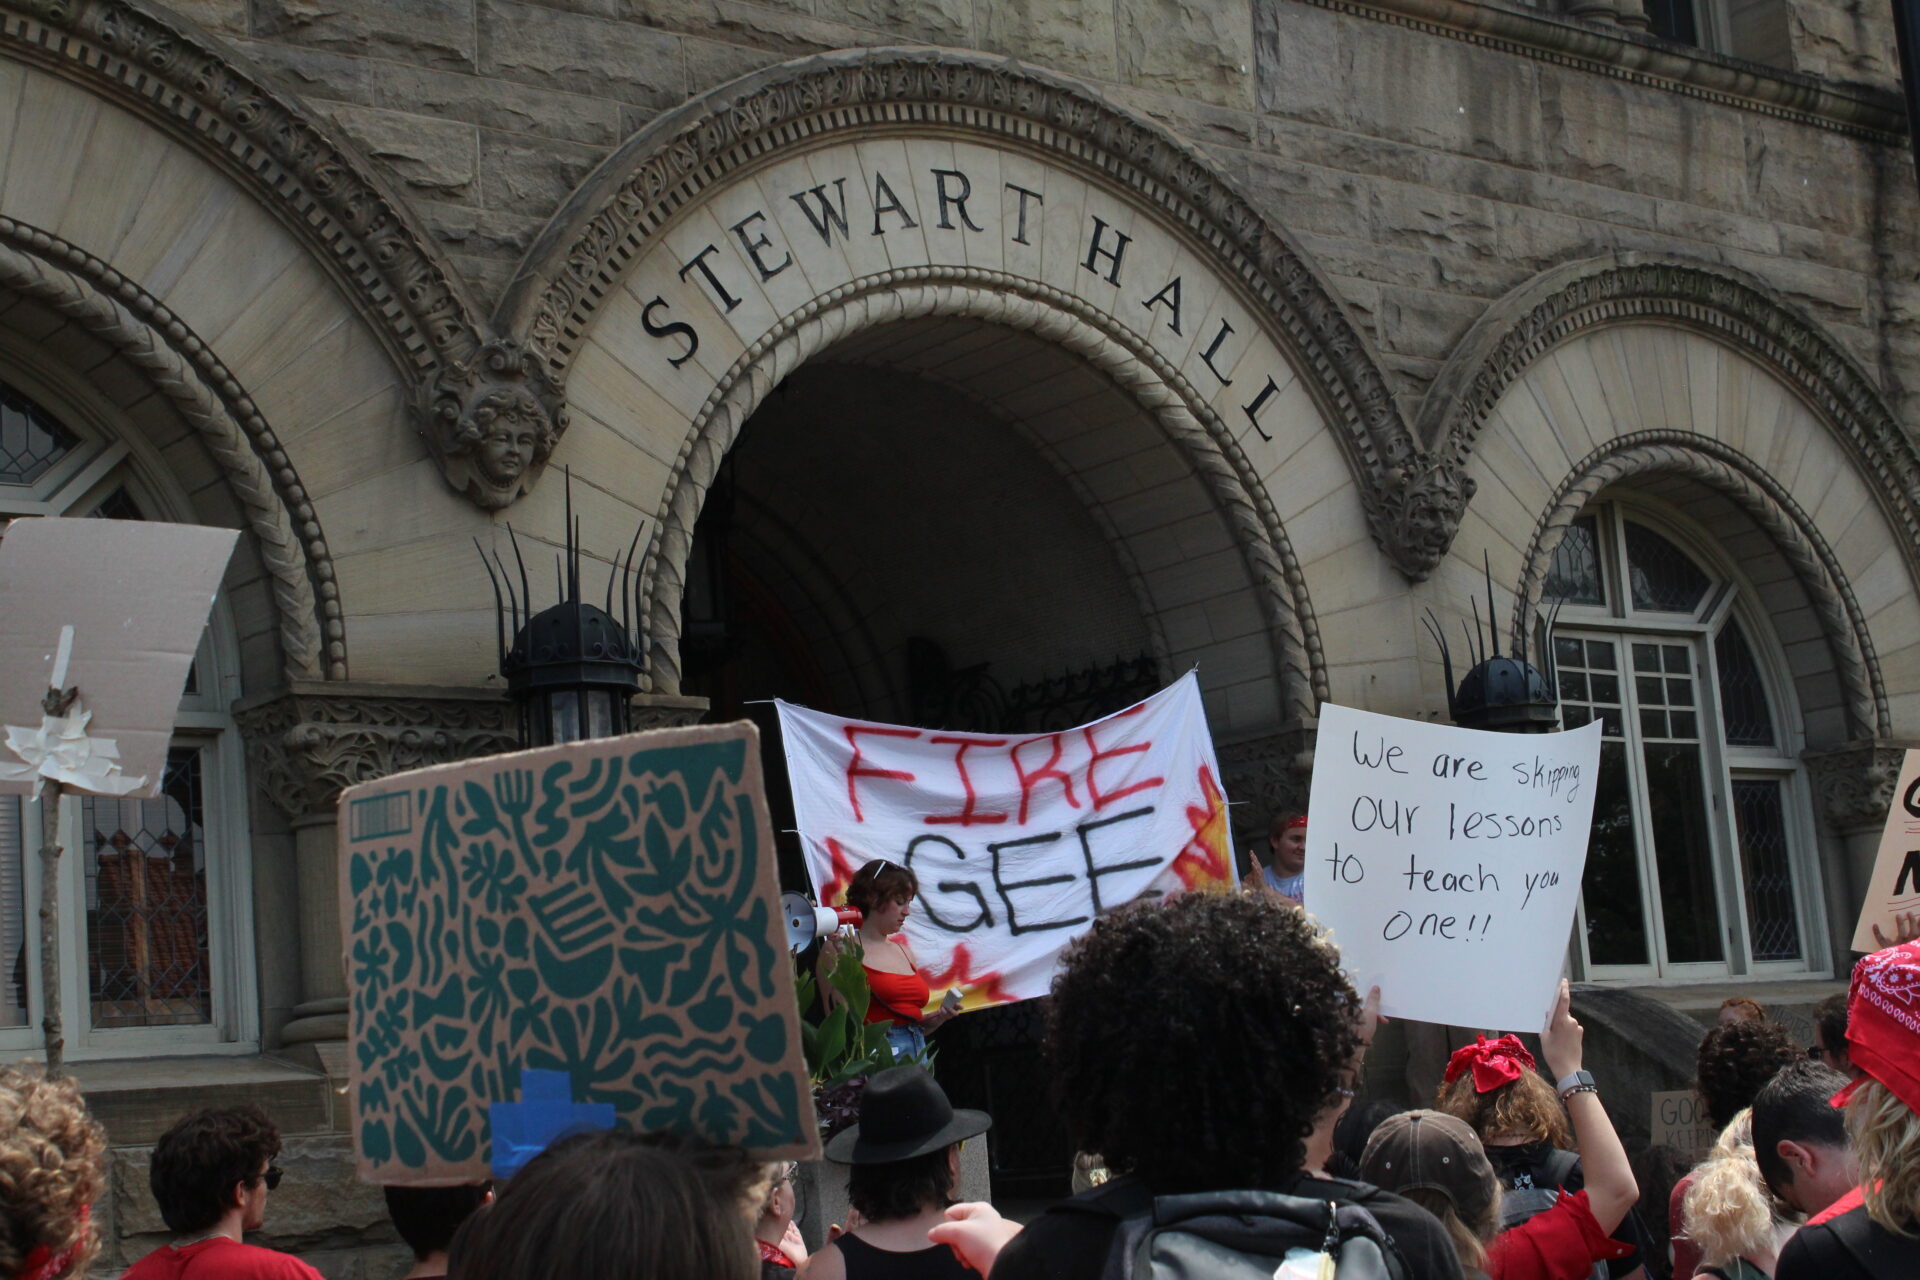 A sign on a bedsheet that reads "Fire Gee" over painted flames is held up under the entry arch of WVU's Stewart Hall. Another visible sign is held up over a crowd's head reads "We are skipping our lessons to teach you one!!"